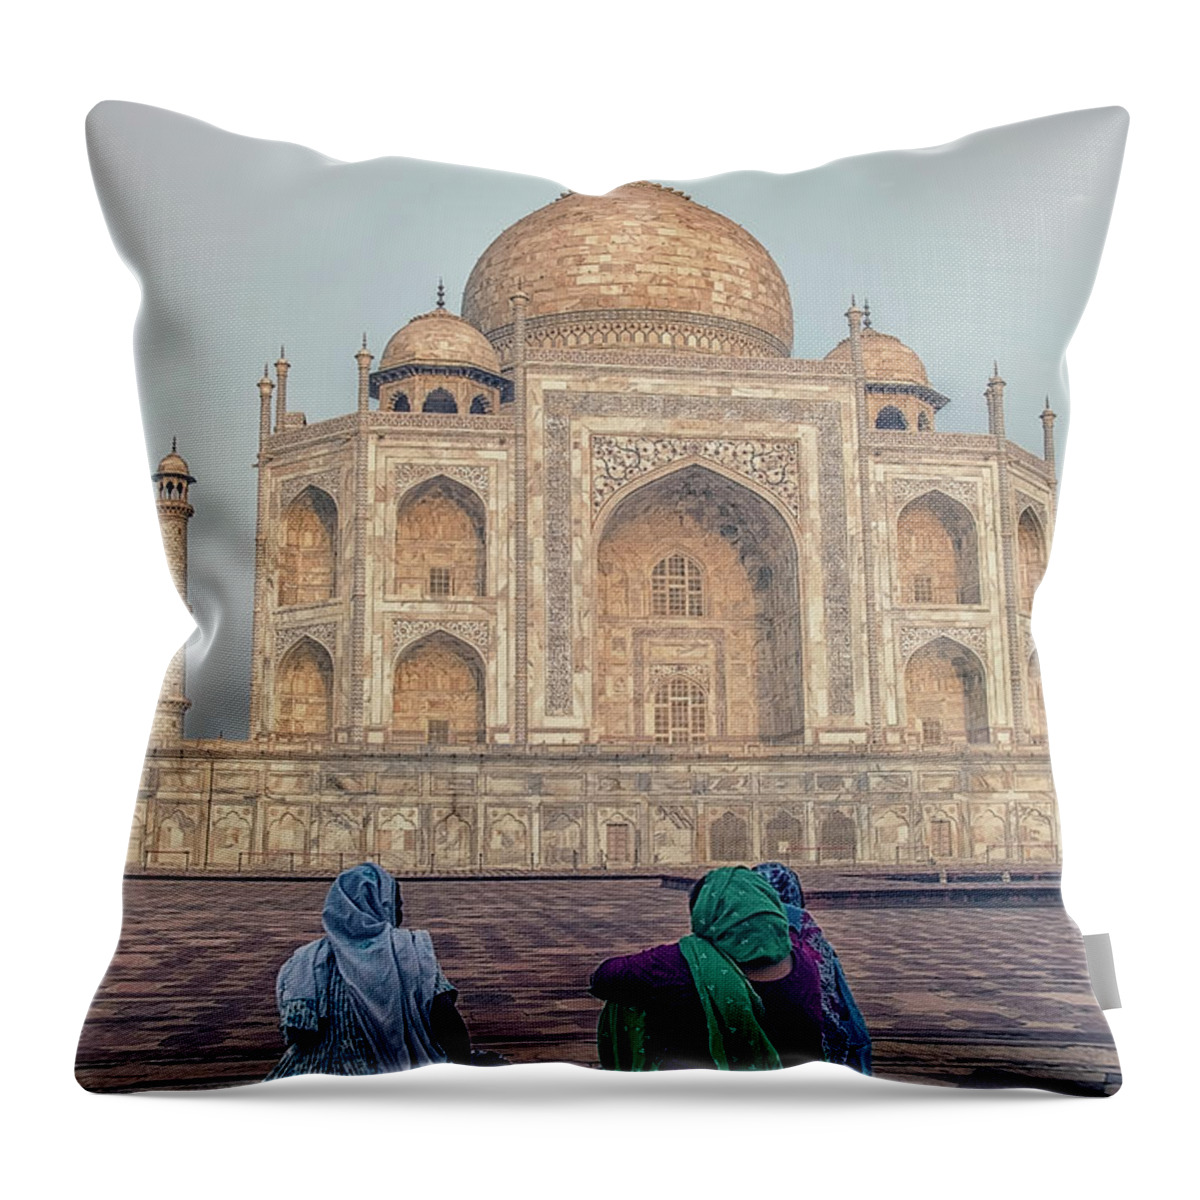 Architecture Throw Pillow featuring the photograph Taj Mahal Ladies by Manjik Pictures